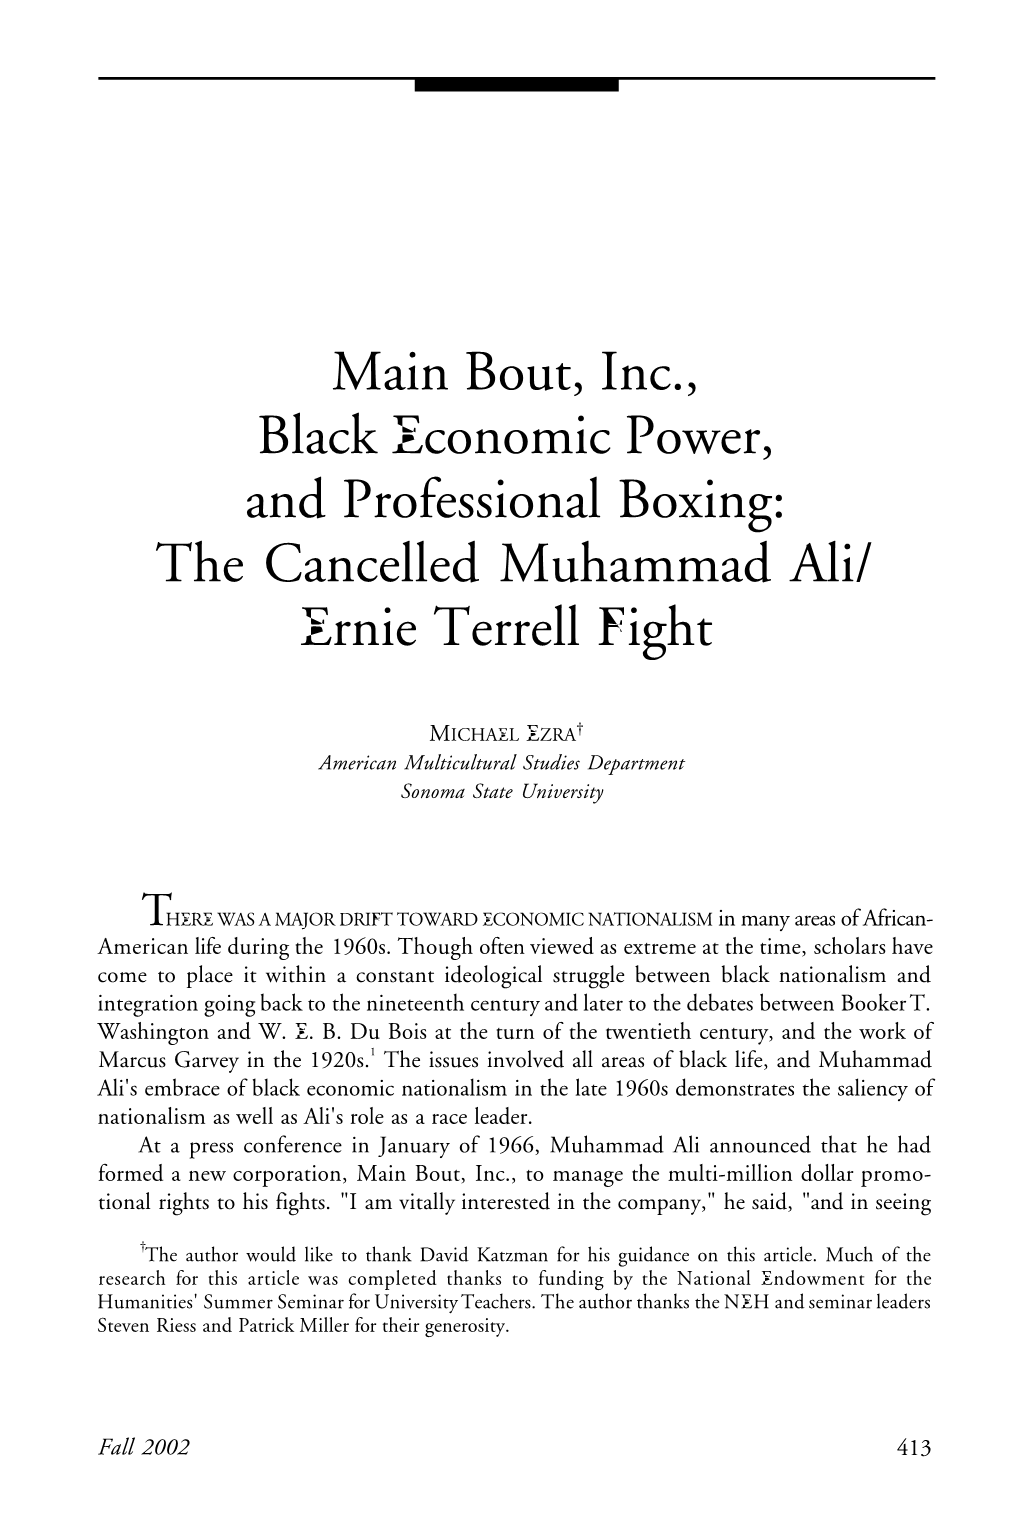 Main Bout, Inc., Black Economic Power, and Professional Boxing: the Cancelled Muhammad Ali/ Ernie Terrell Fight